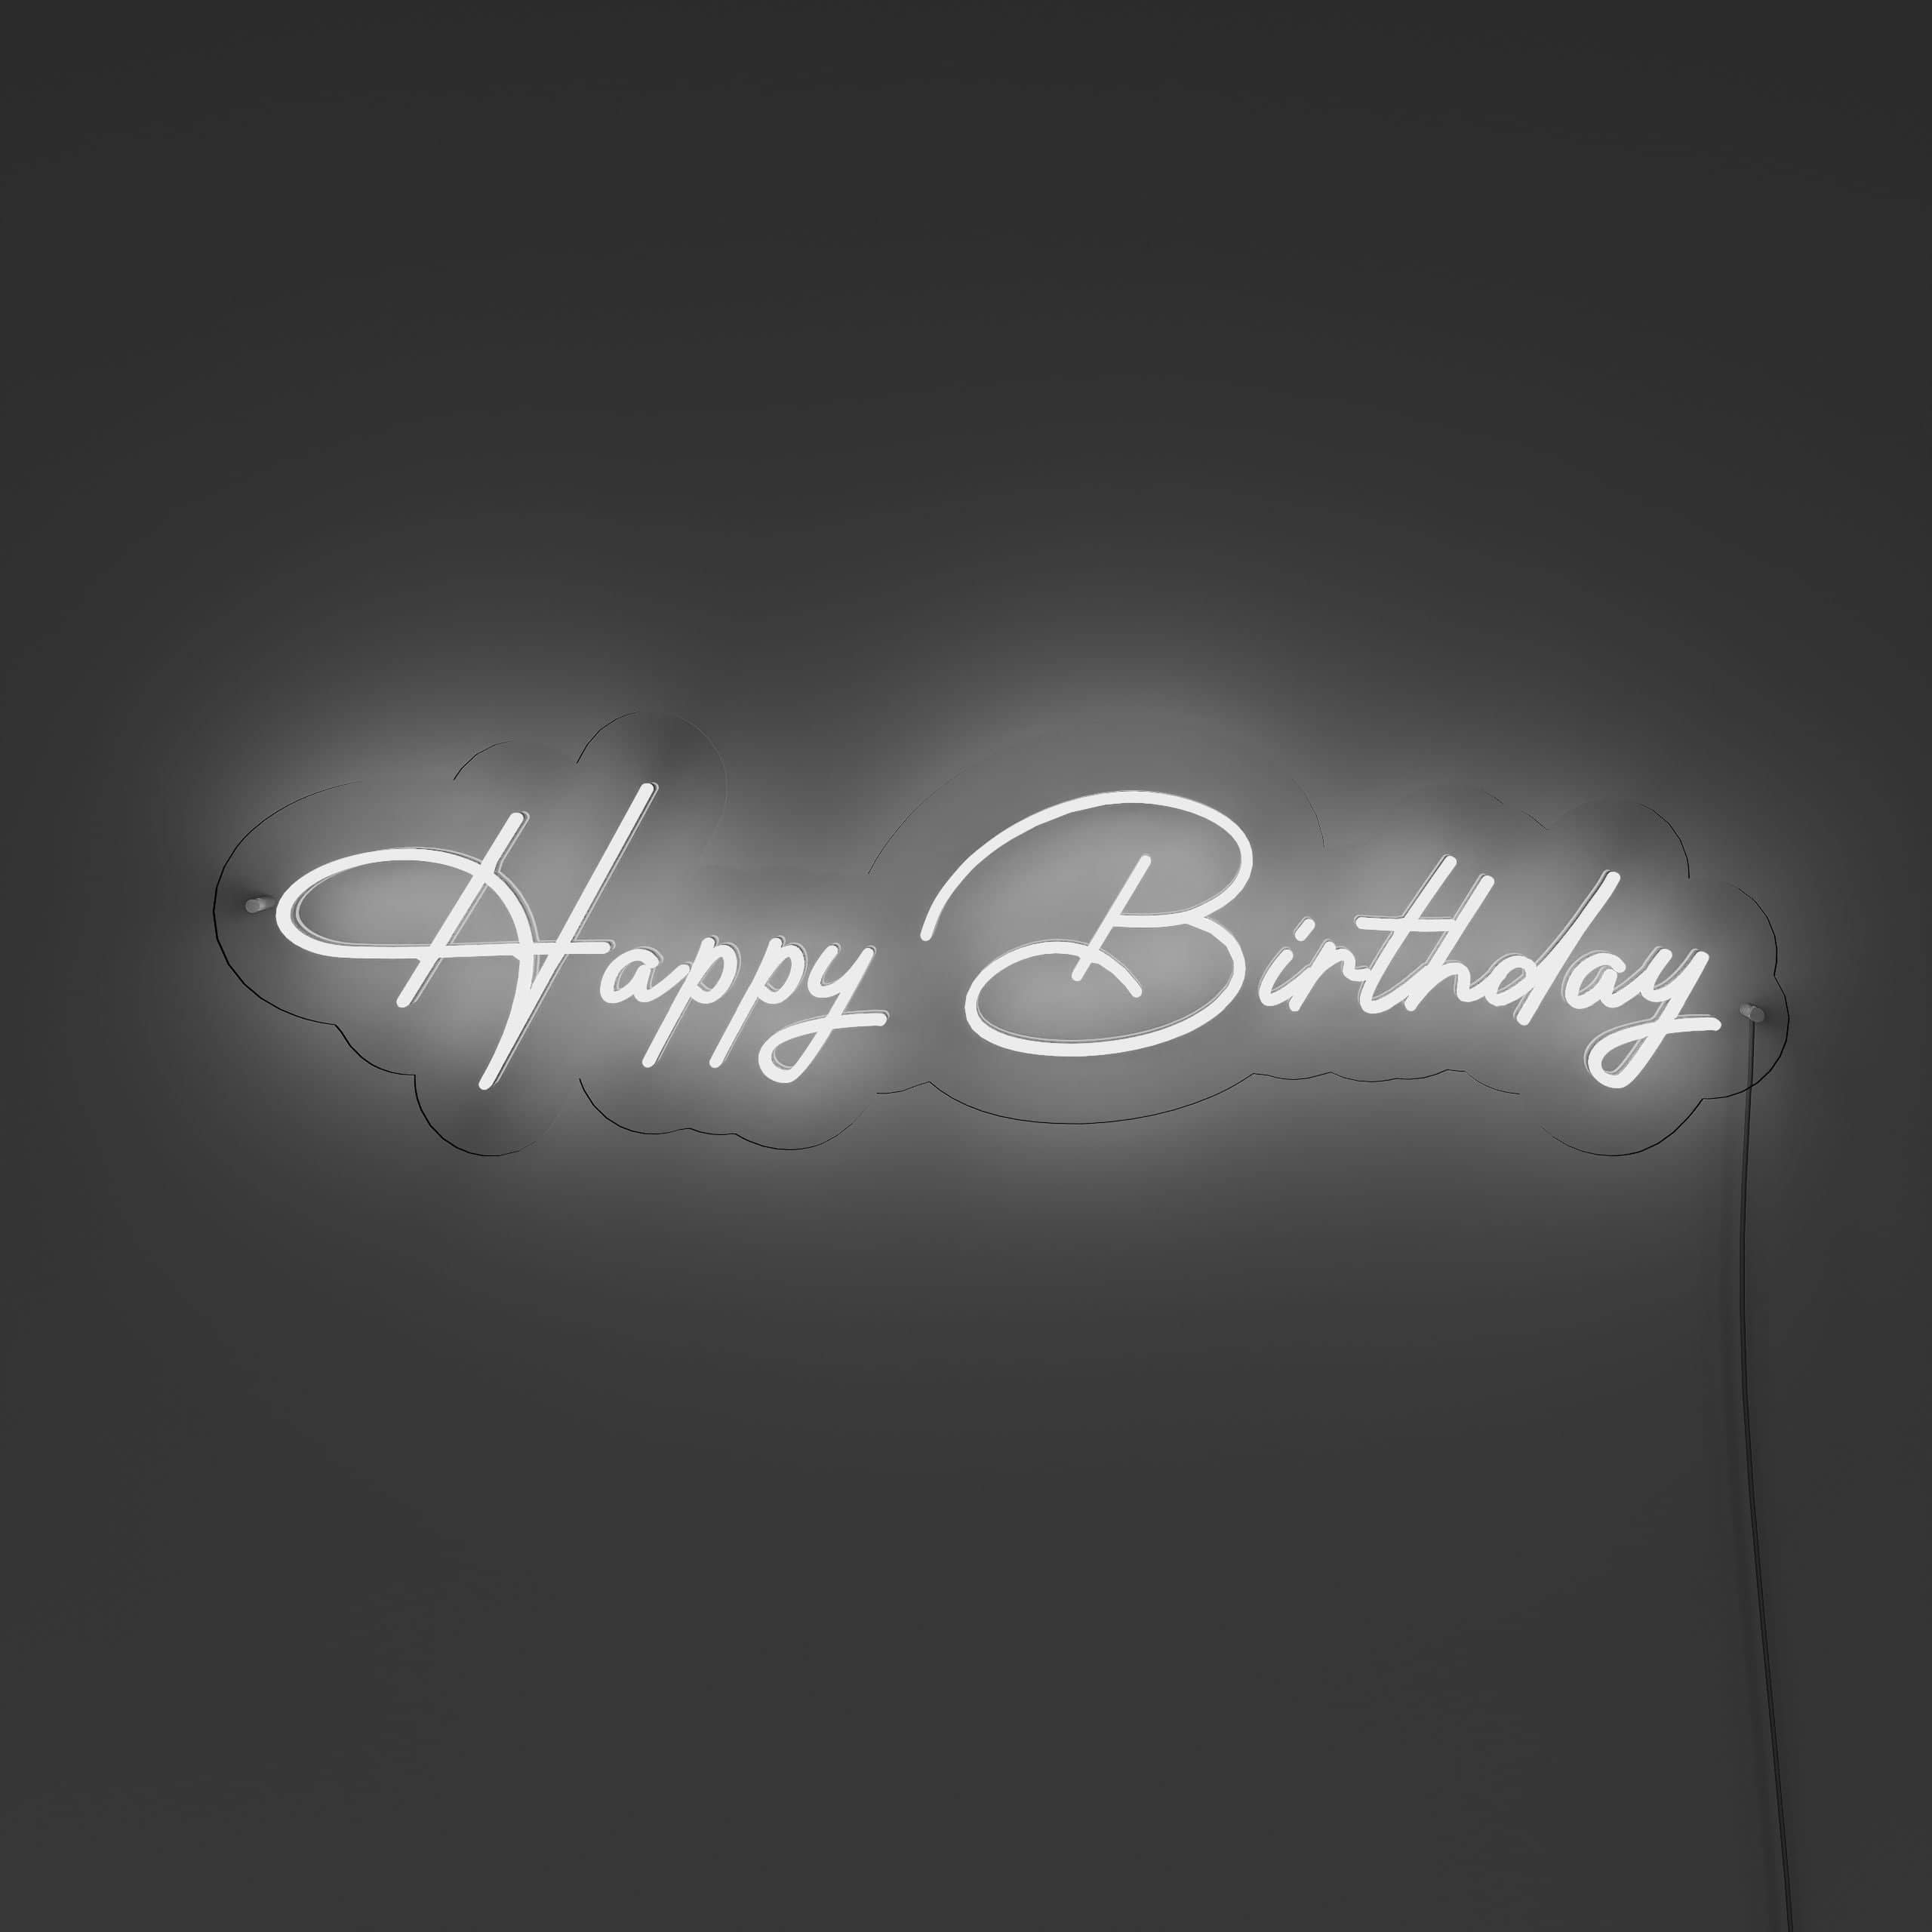 may-your-day-be-filled-with-happiness!-neon-sign-lite